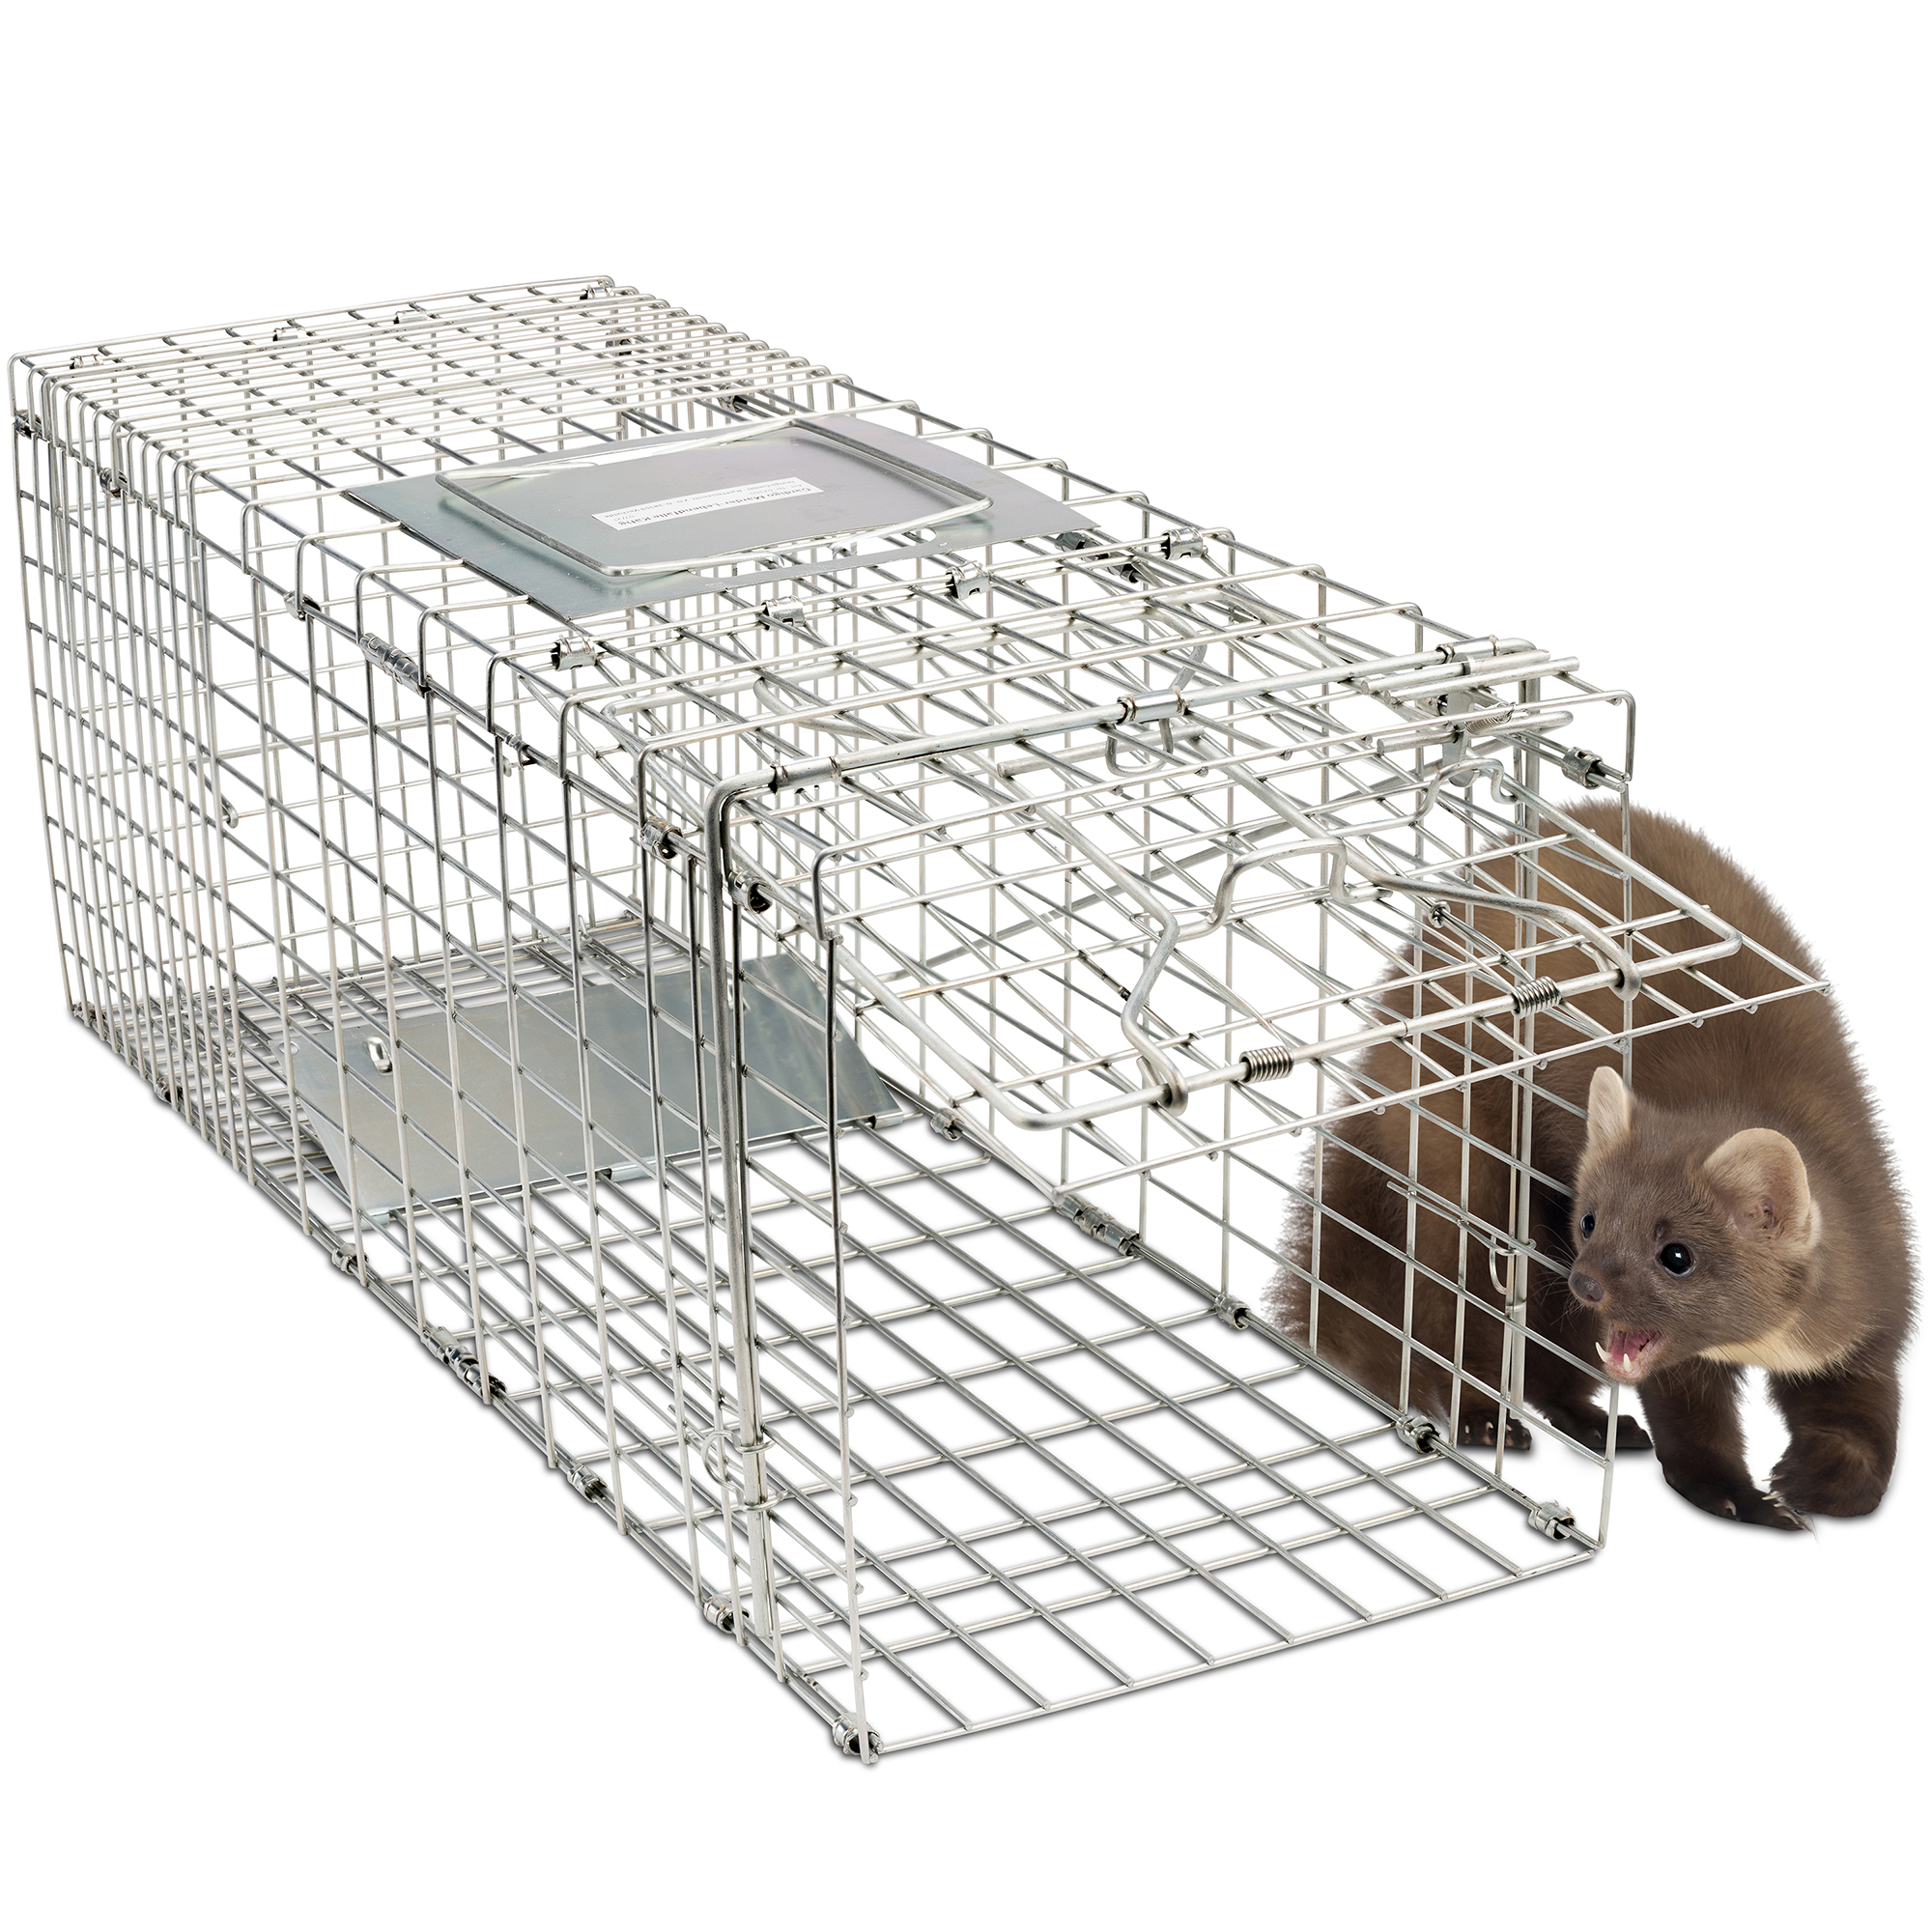 Marten Live Trap | also suitable for catching raccons, cats & nutria